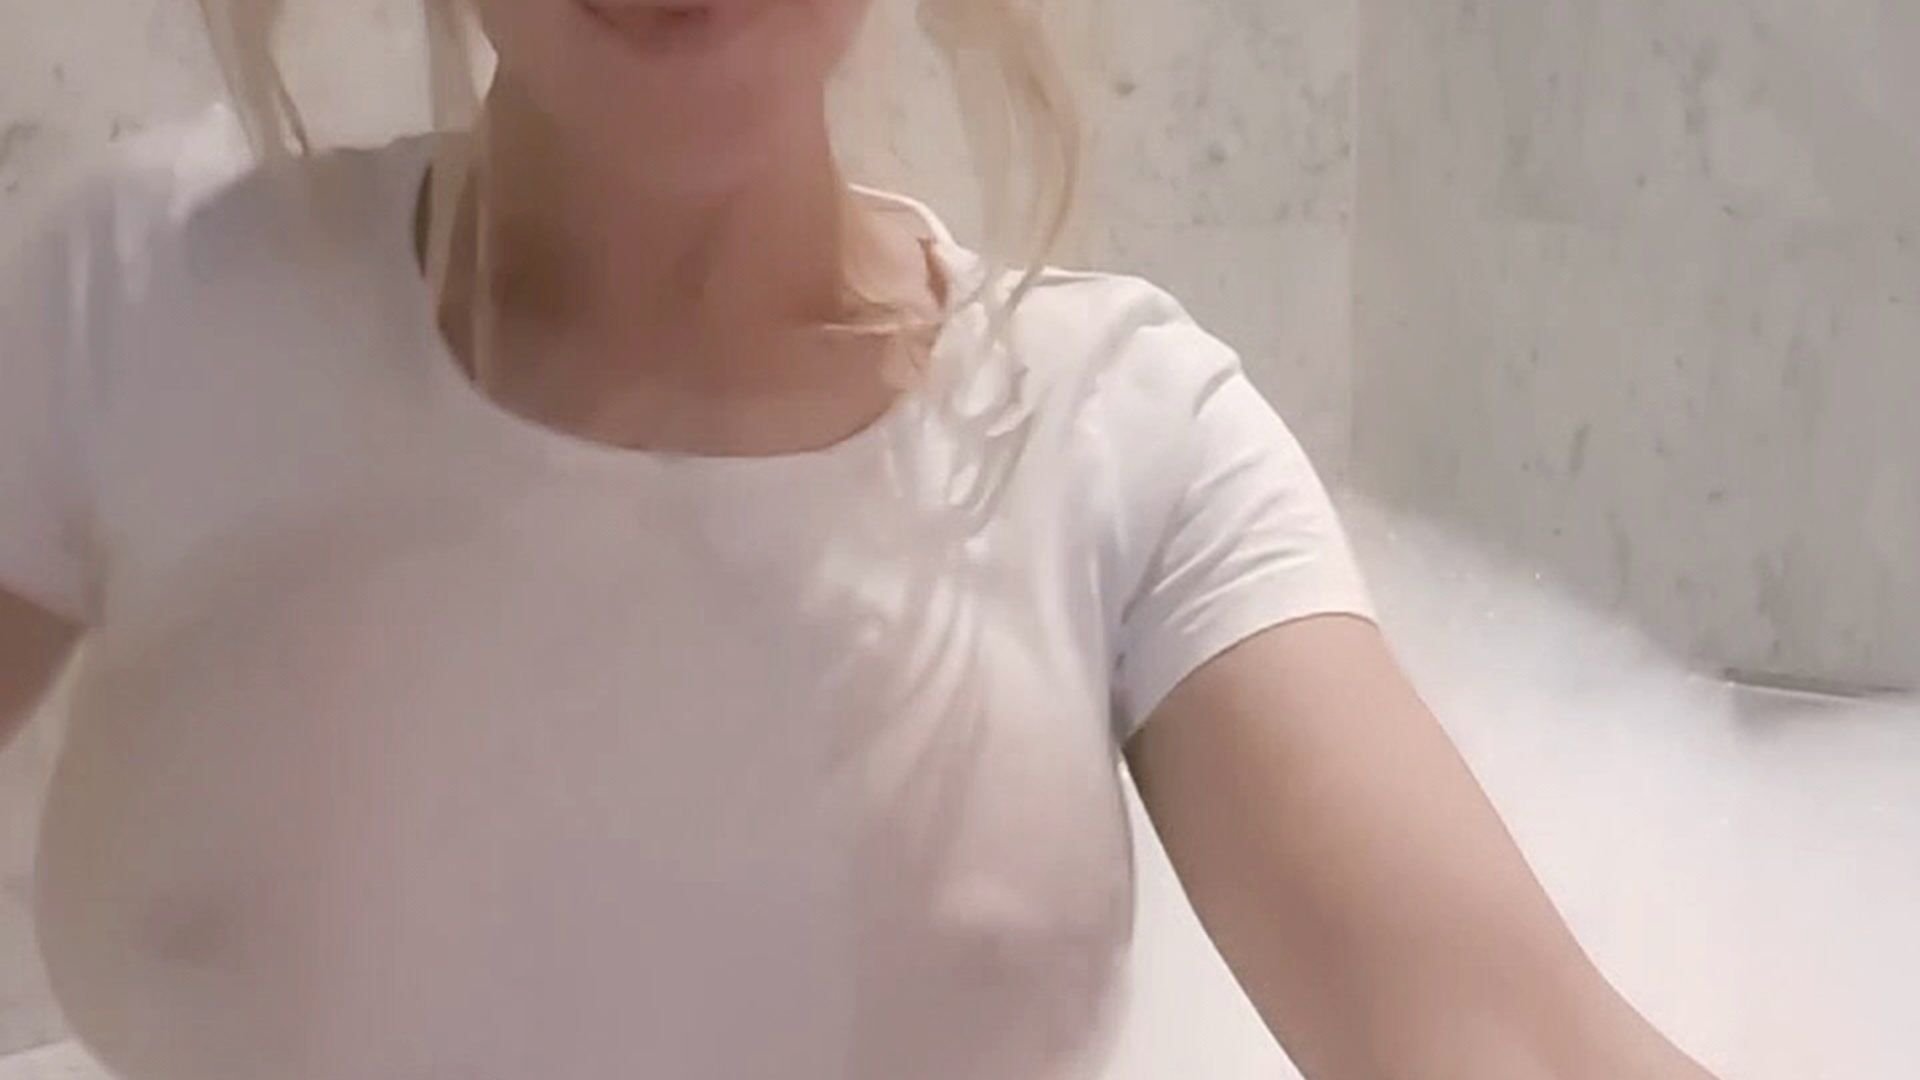 Jacuzzi clip from liveshow, wet t-shirt